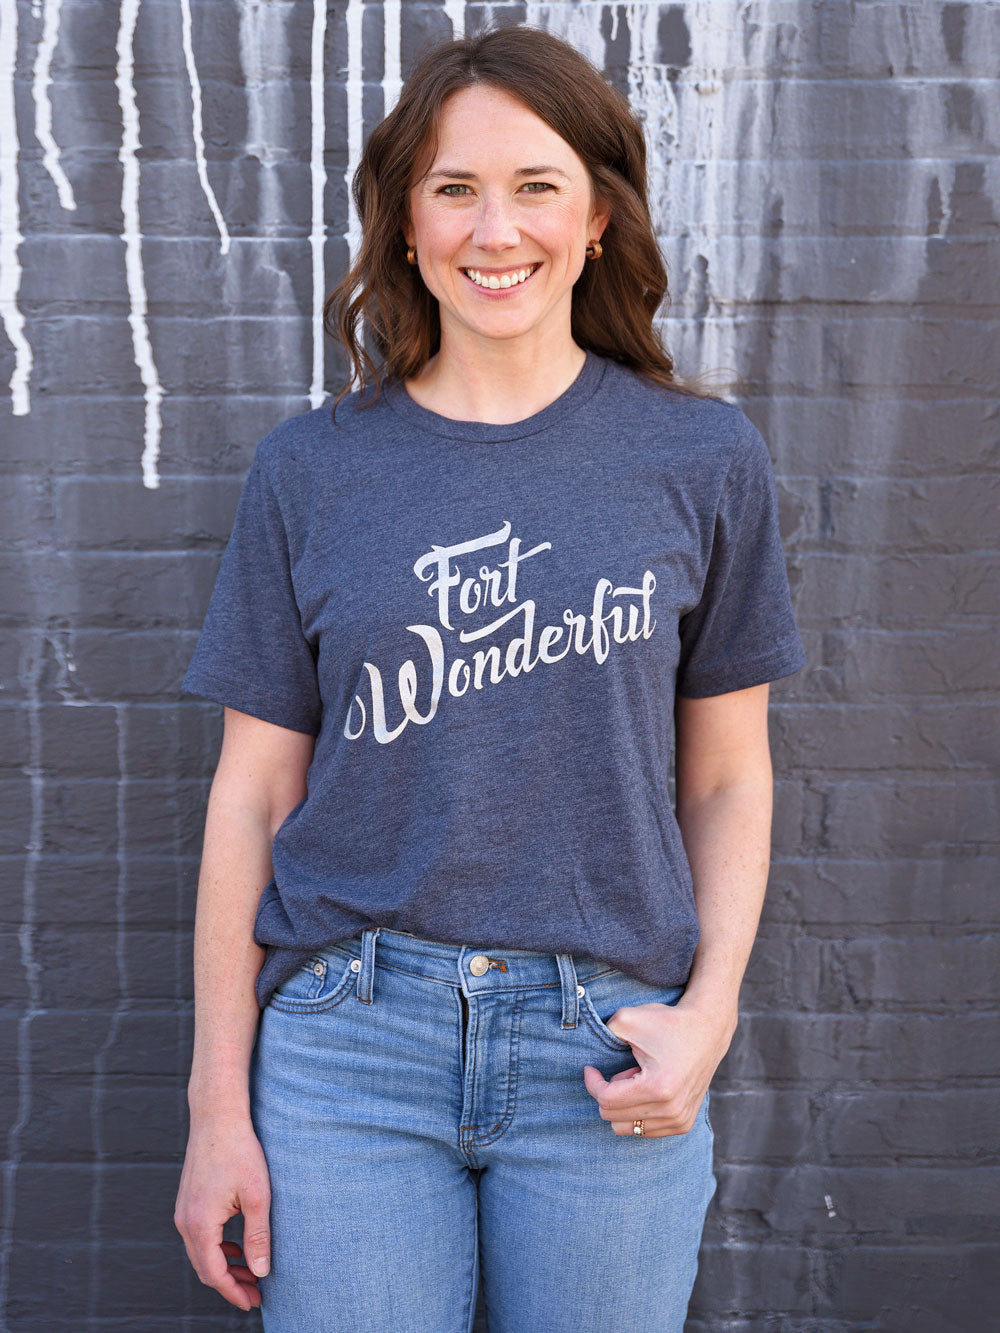 Fort Wonderful navy t-shirt on model in front of black brick wall